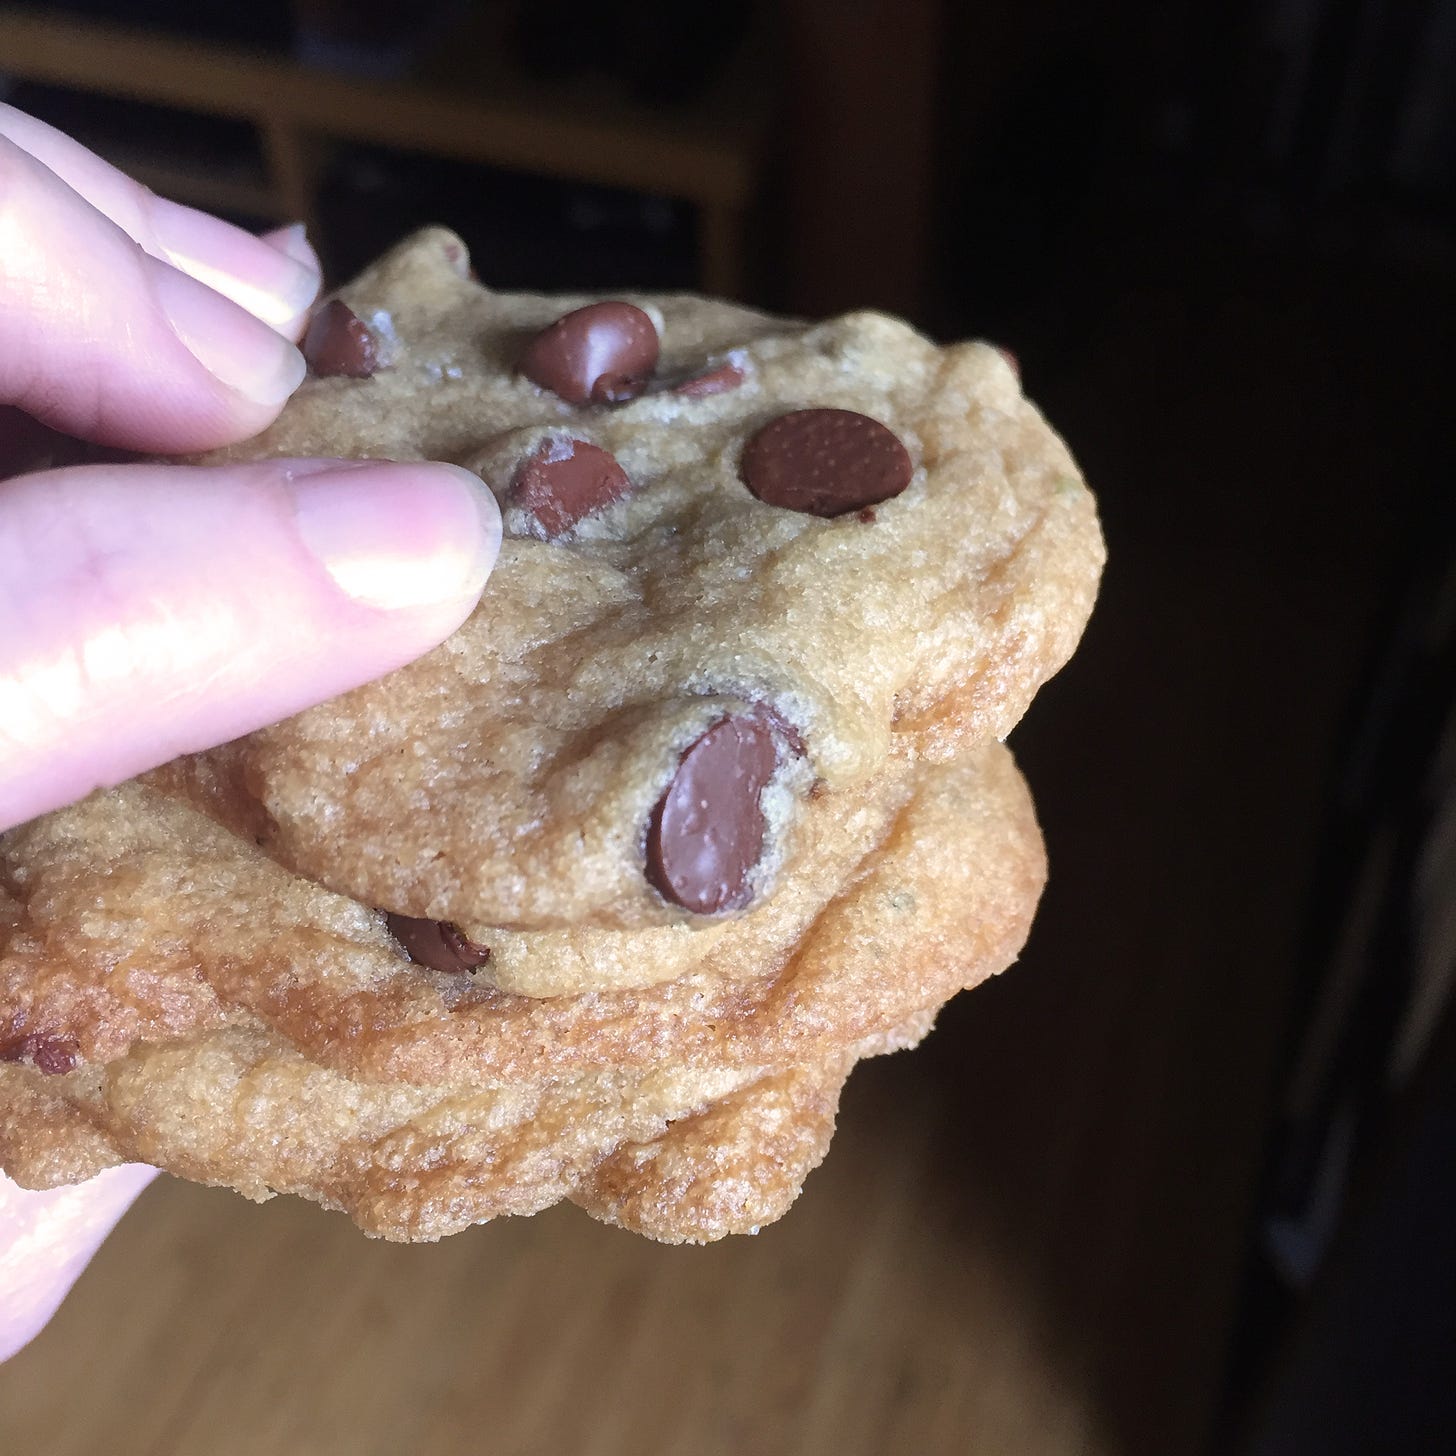 My hand just at the edge of the frame, holding a stack of three chocolate chip cookies.